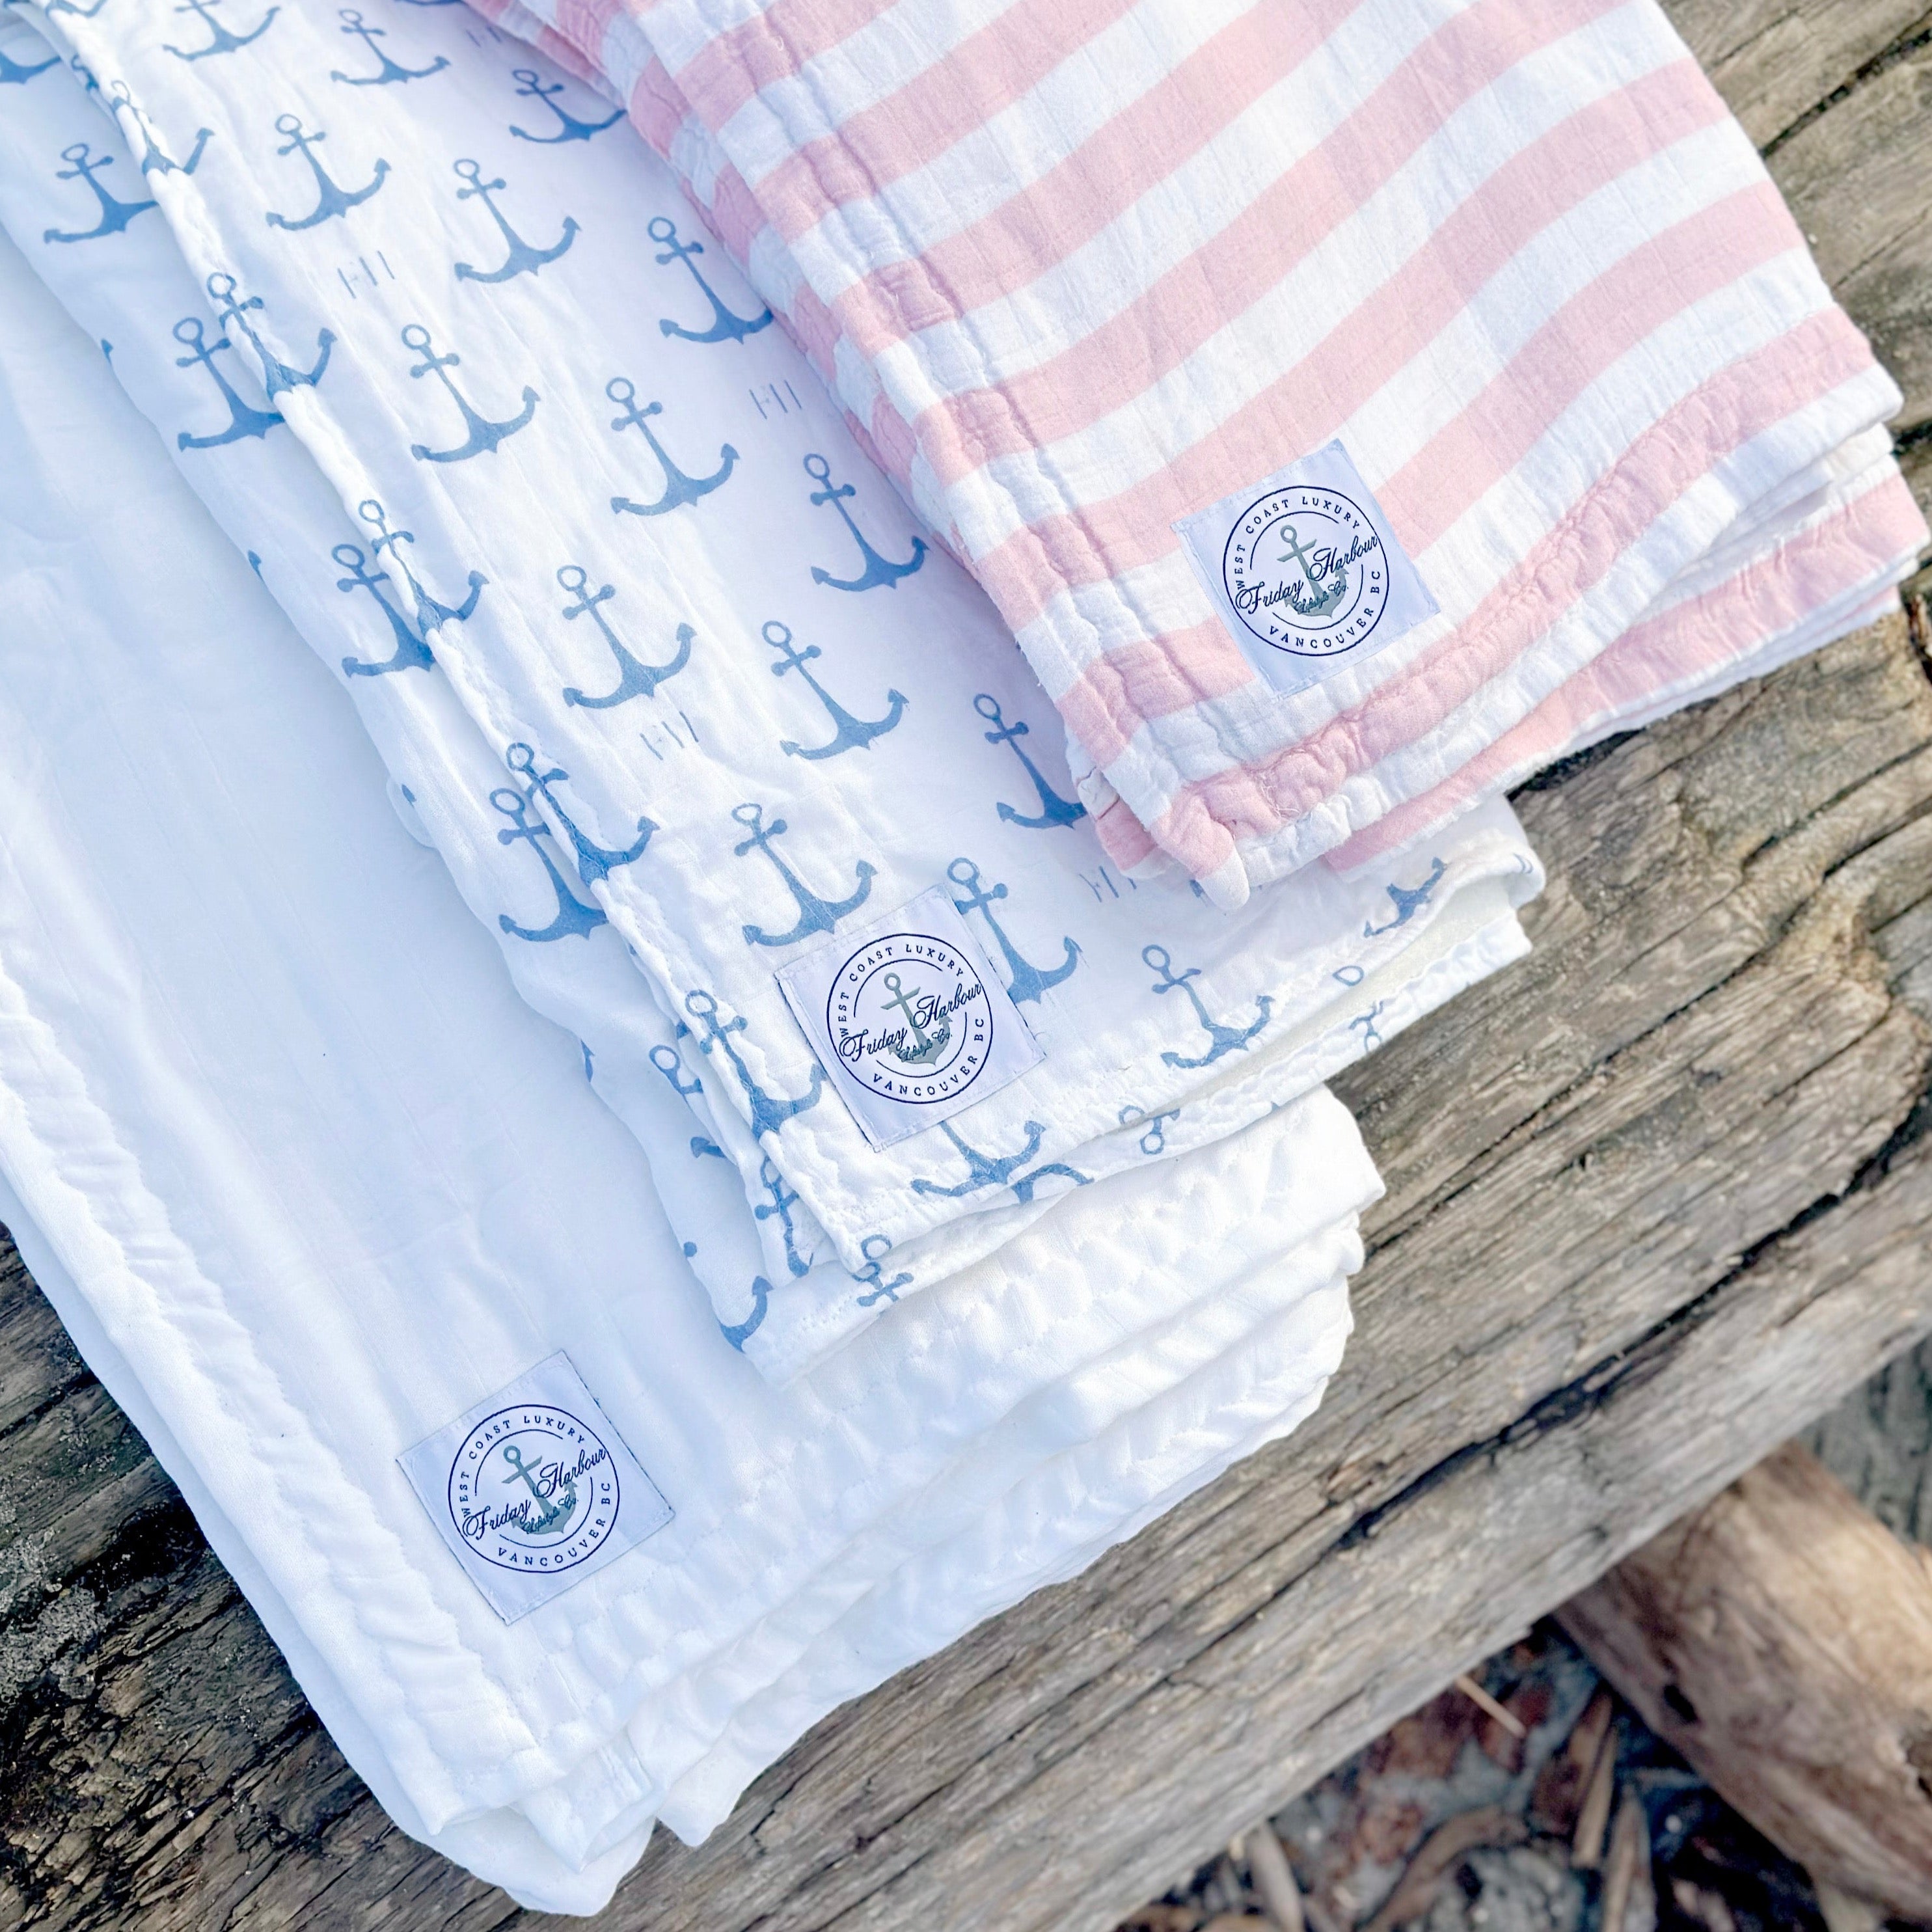 The Kids Cloud Towel - Pink & White Stripe - Friday Harbour Lifestyle Company 